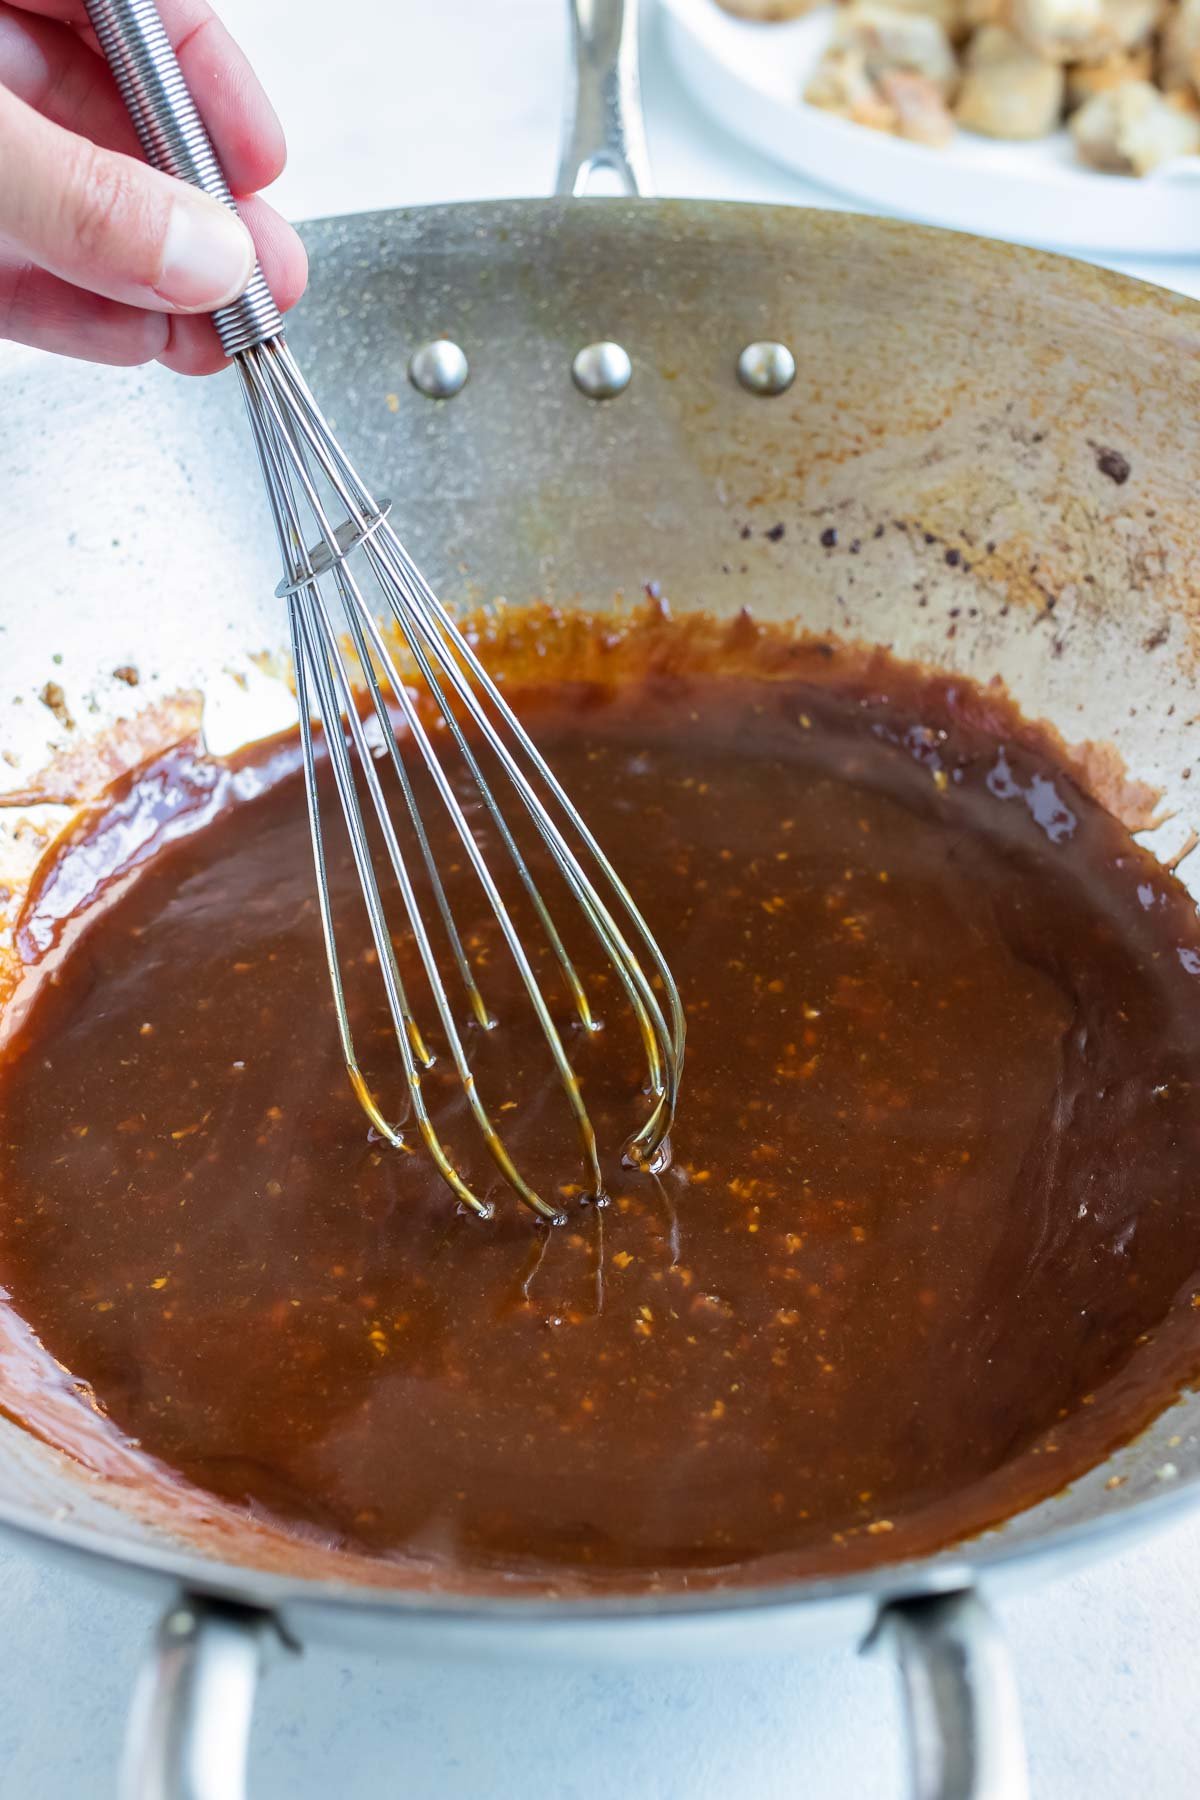 The sauce ingredients are mixed together on the stove.